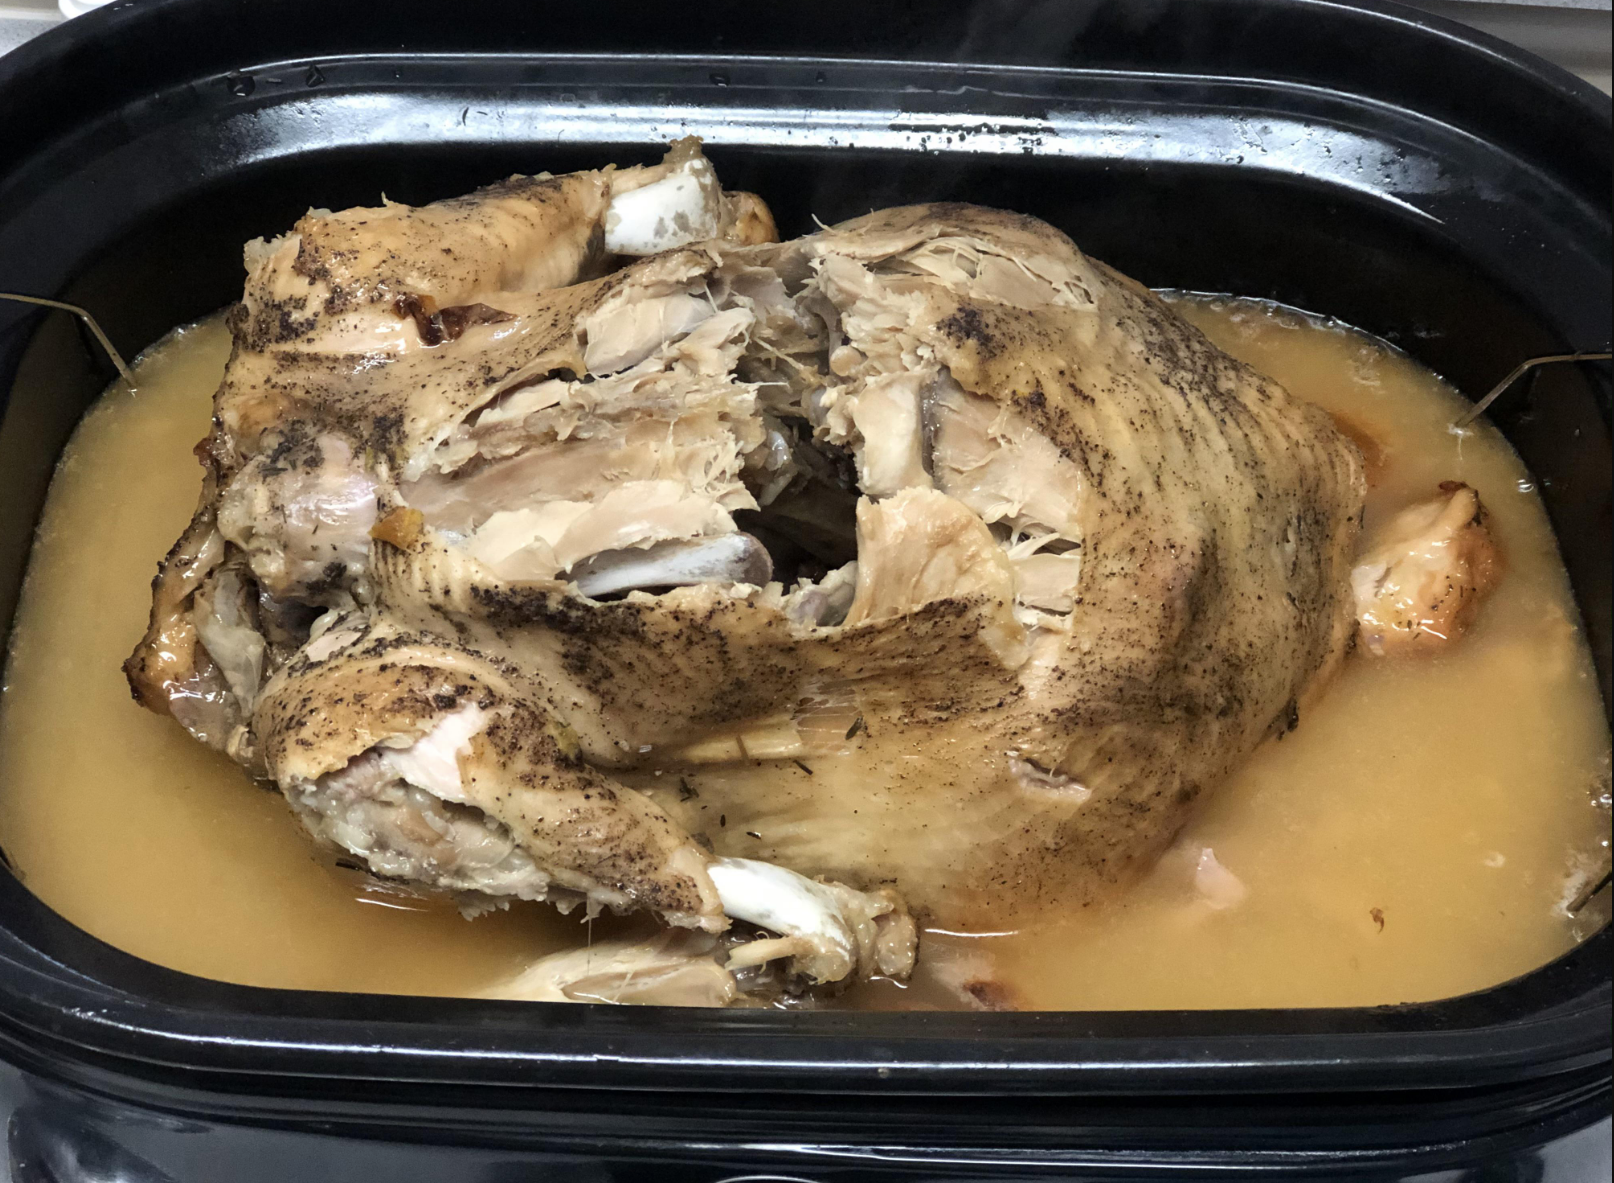 turkey with random pieces taken out of it sitting in a crockpot of juices